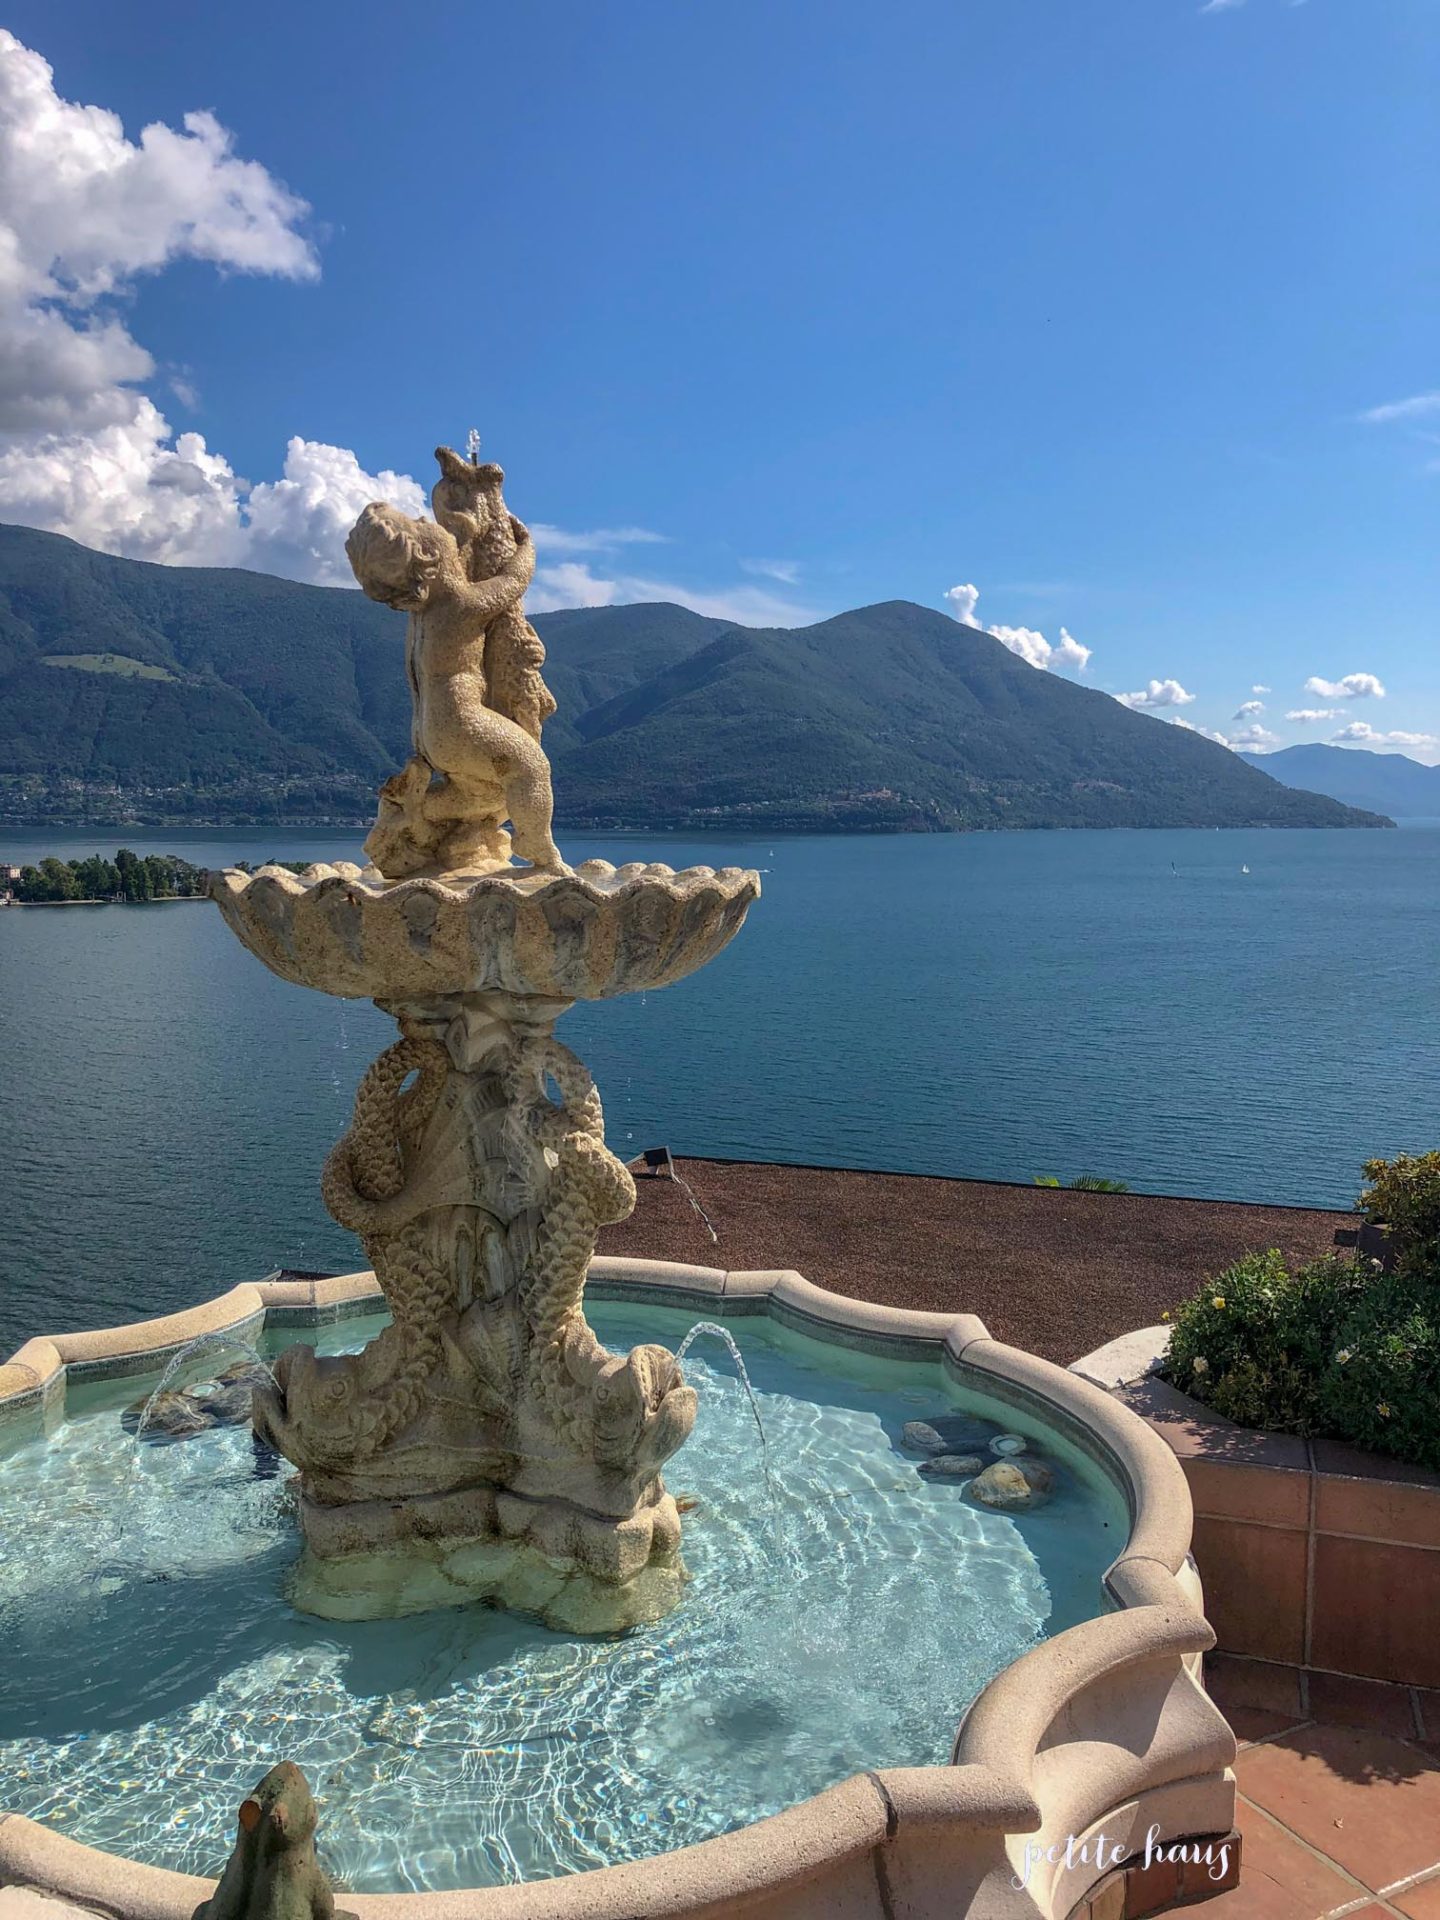 A Swiss Chocolate Factory and Lake Maggiore